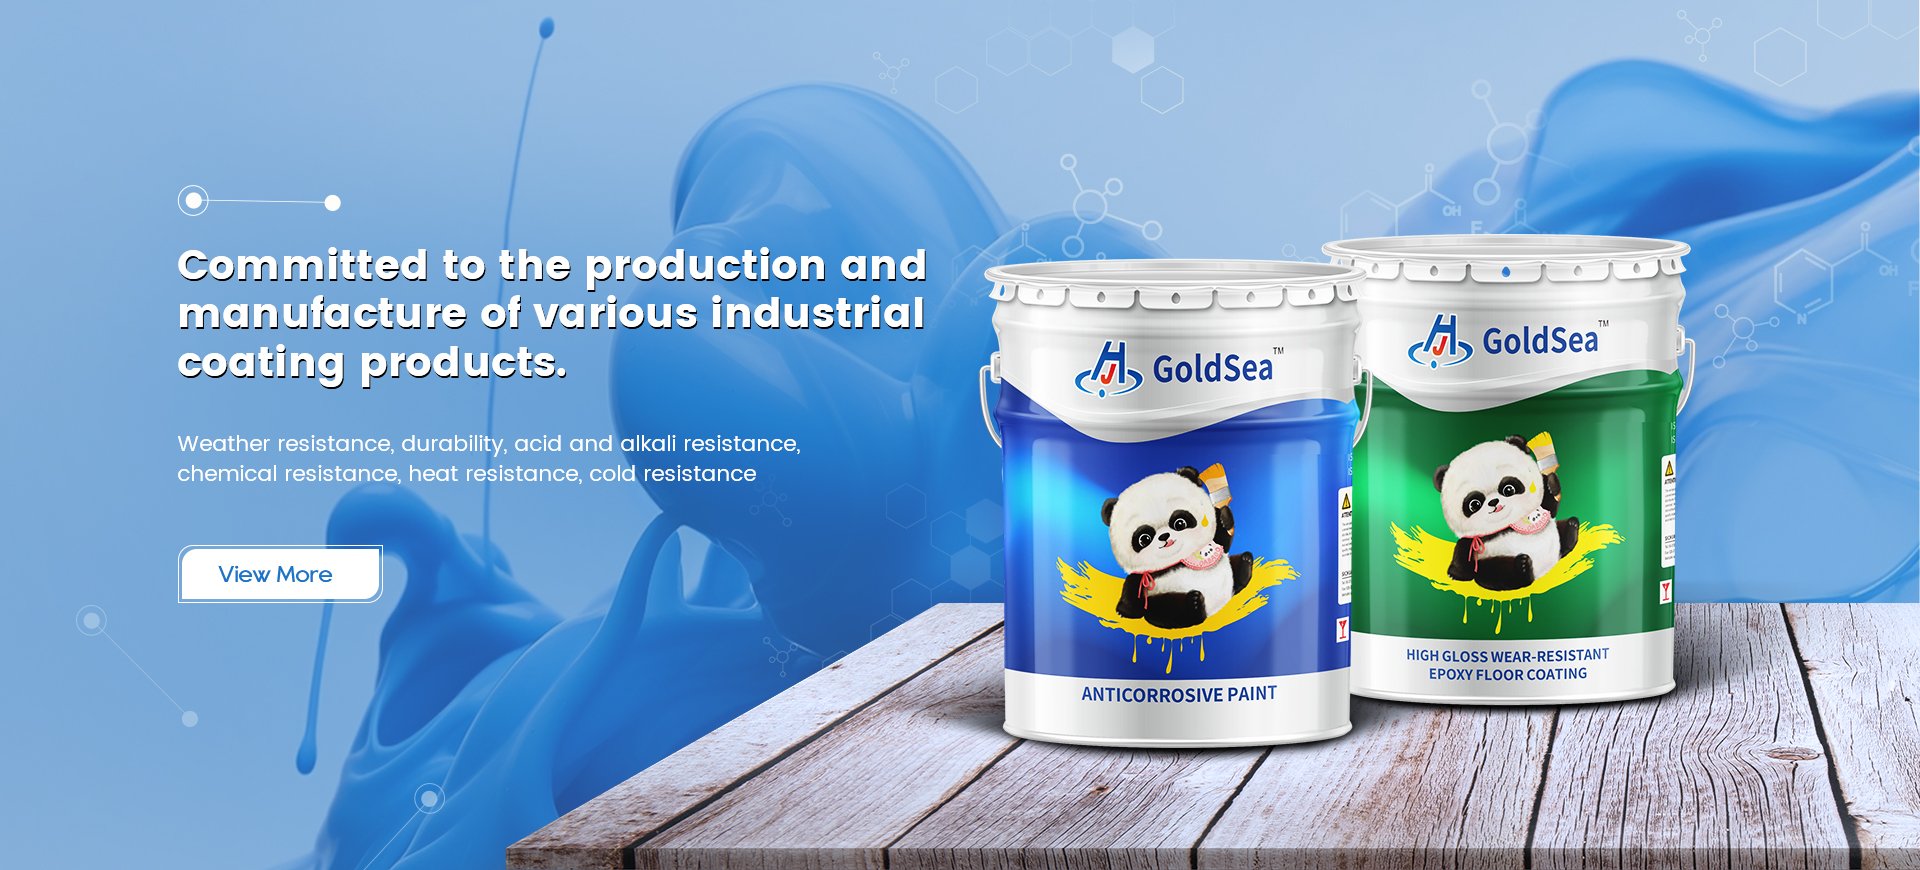 Committed to the production and manufacture of various industrial coating products